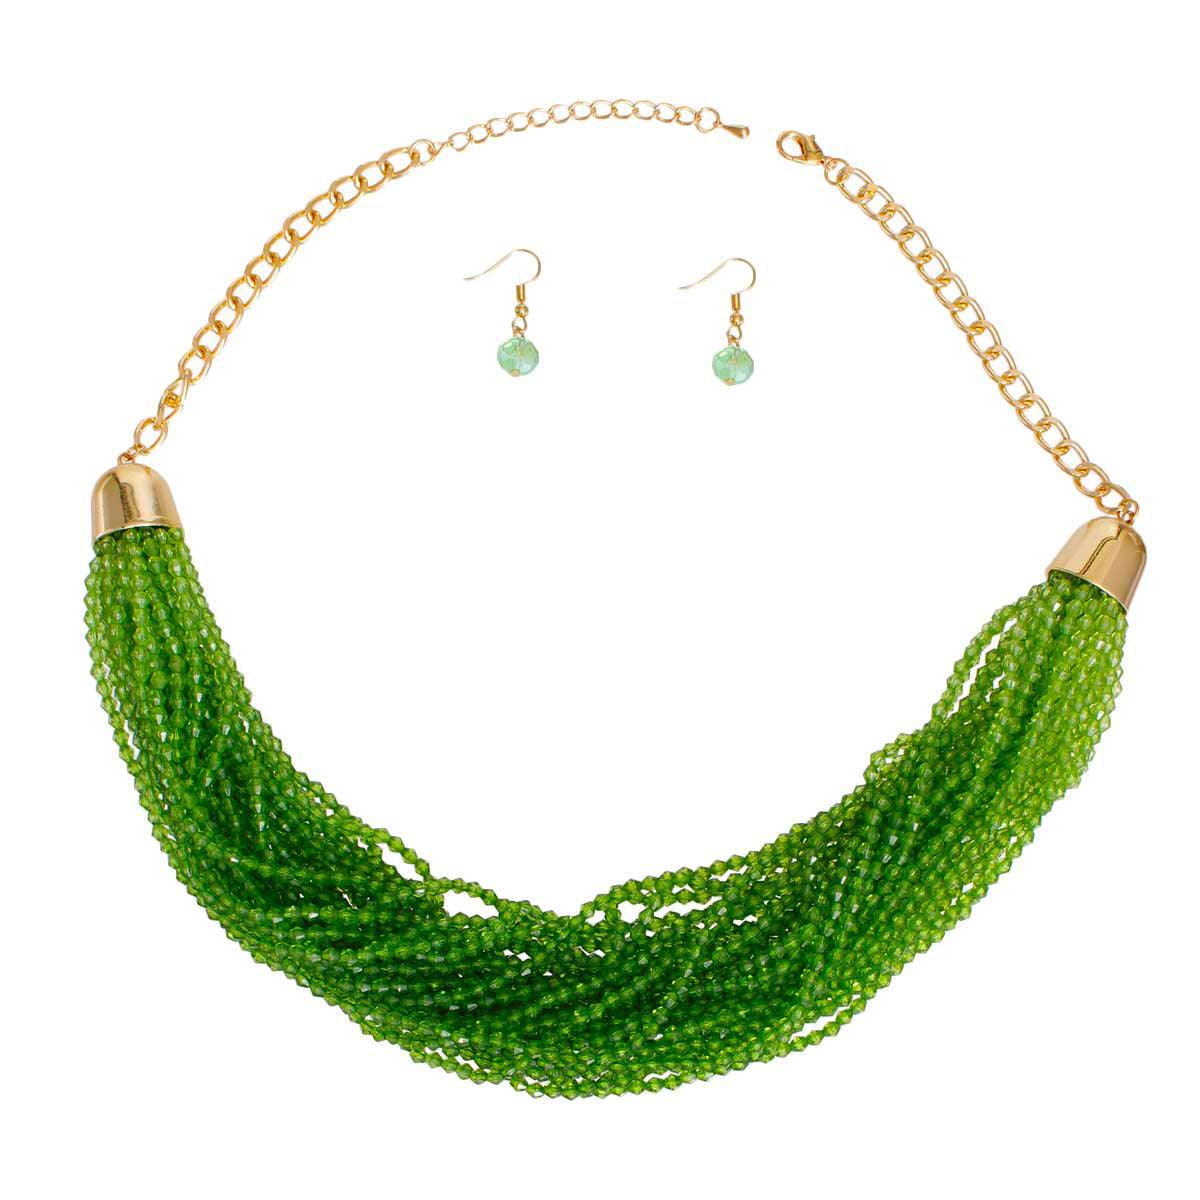 Green Bead Multi Strand Necklace with Earrings